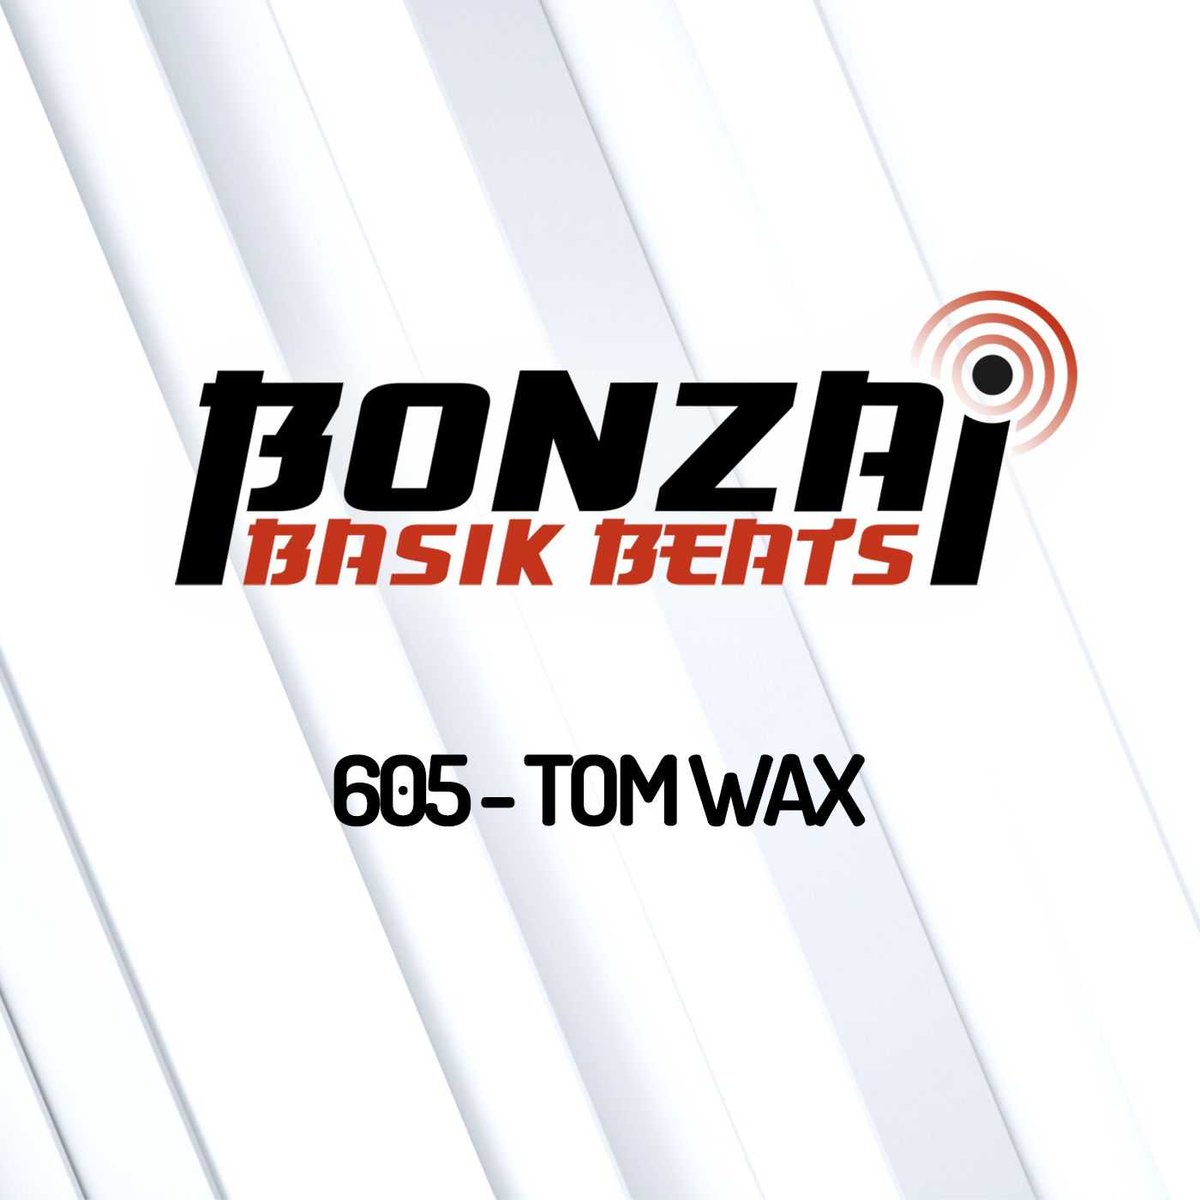 Tom Wax joins us once again on this week’s Bonzai Basik Beats with another superb mix. In the mix tonight, you can expect Techno gems from the likes of Rompax, Tom Wax, Conscious, Adam Beyer, Julian Jeweil, Rico Puestel and more.  #nowplaying on #radio https://t.co/8g3SbusSqo https://t.co/HGyFlyNIxj